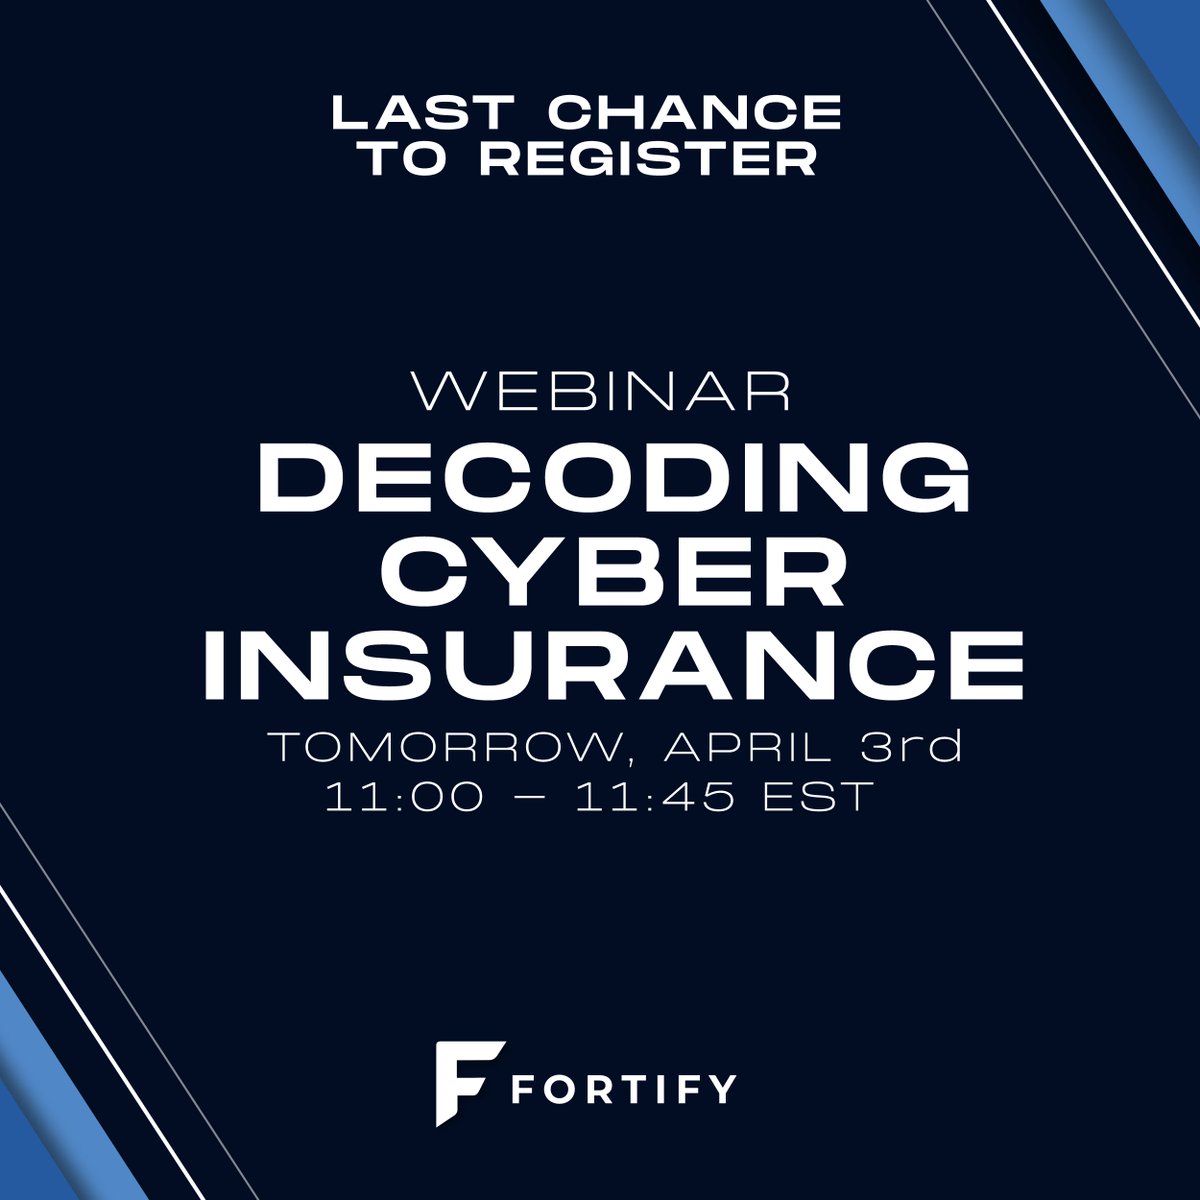 Want to learn more about how to protect your business through Cyber Insurance Readiness? Today is the last day to register for Fortify's Decoding Cyber Insurance webinar in partnership with Coalition. Register here to save your spot: events.teams.microsoft.com/event/2c075404…